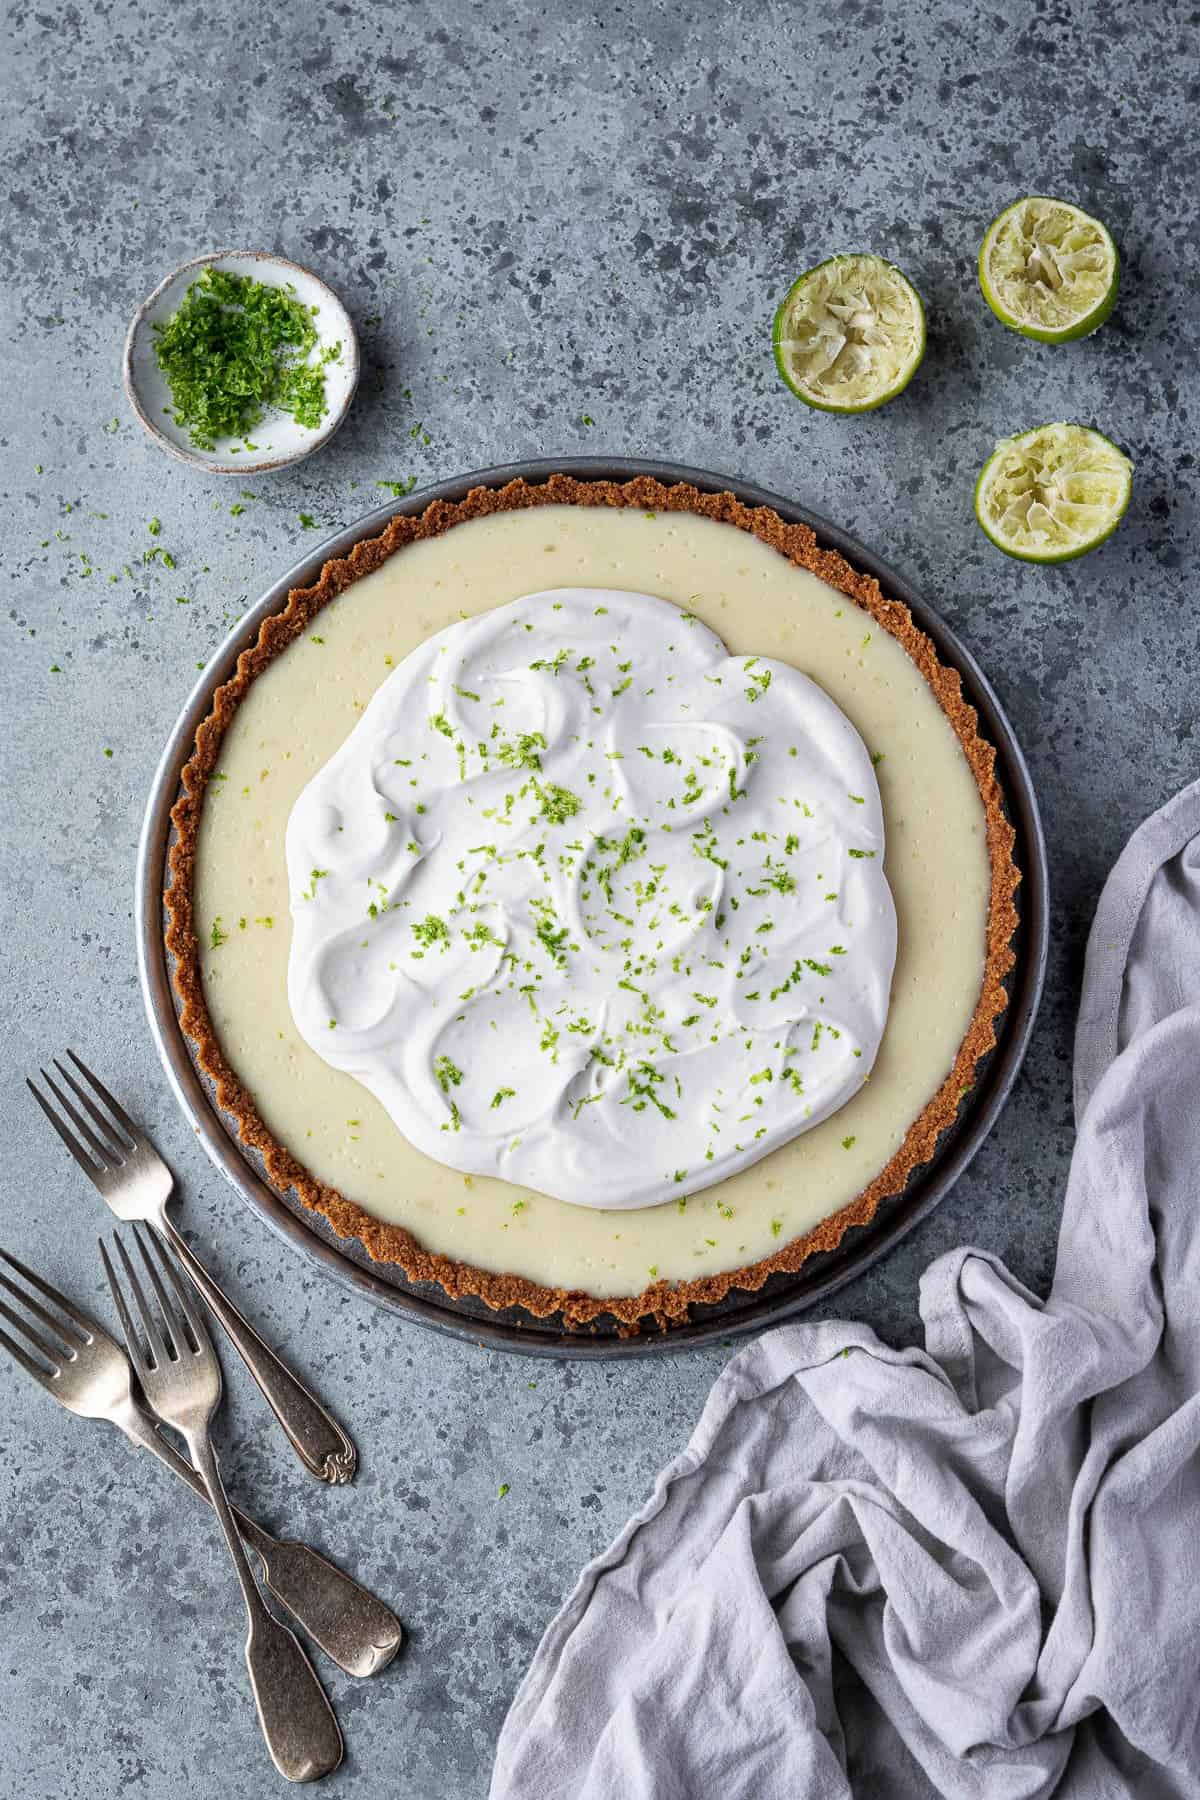 Vegan key lime pie on a grey surface wiith lime halves, a bowl of lime zest and a pile of forks.